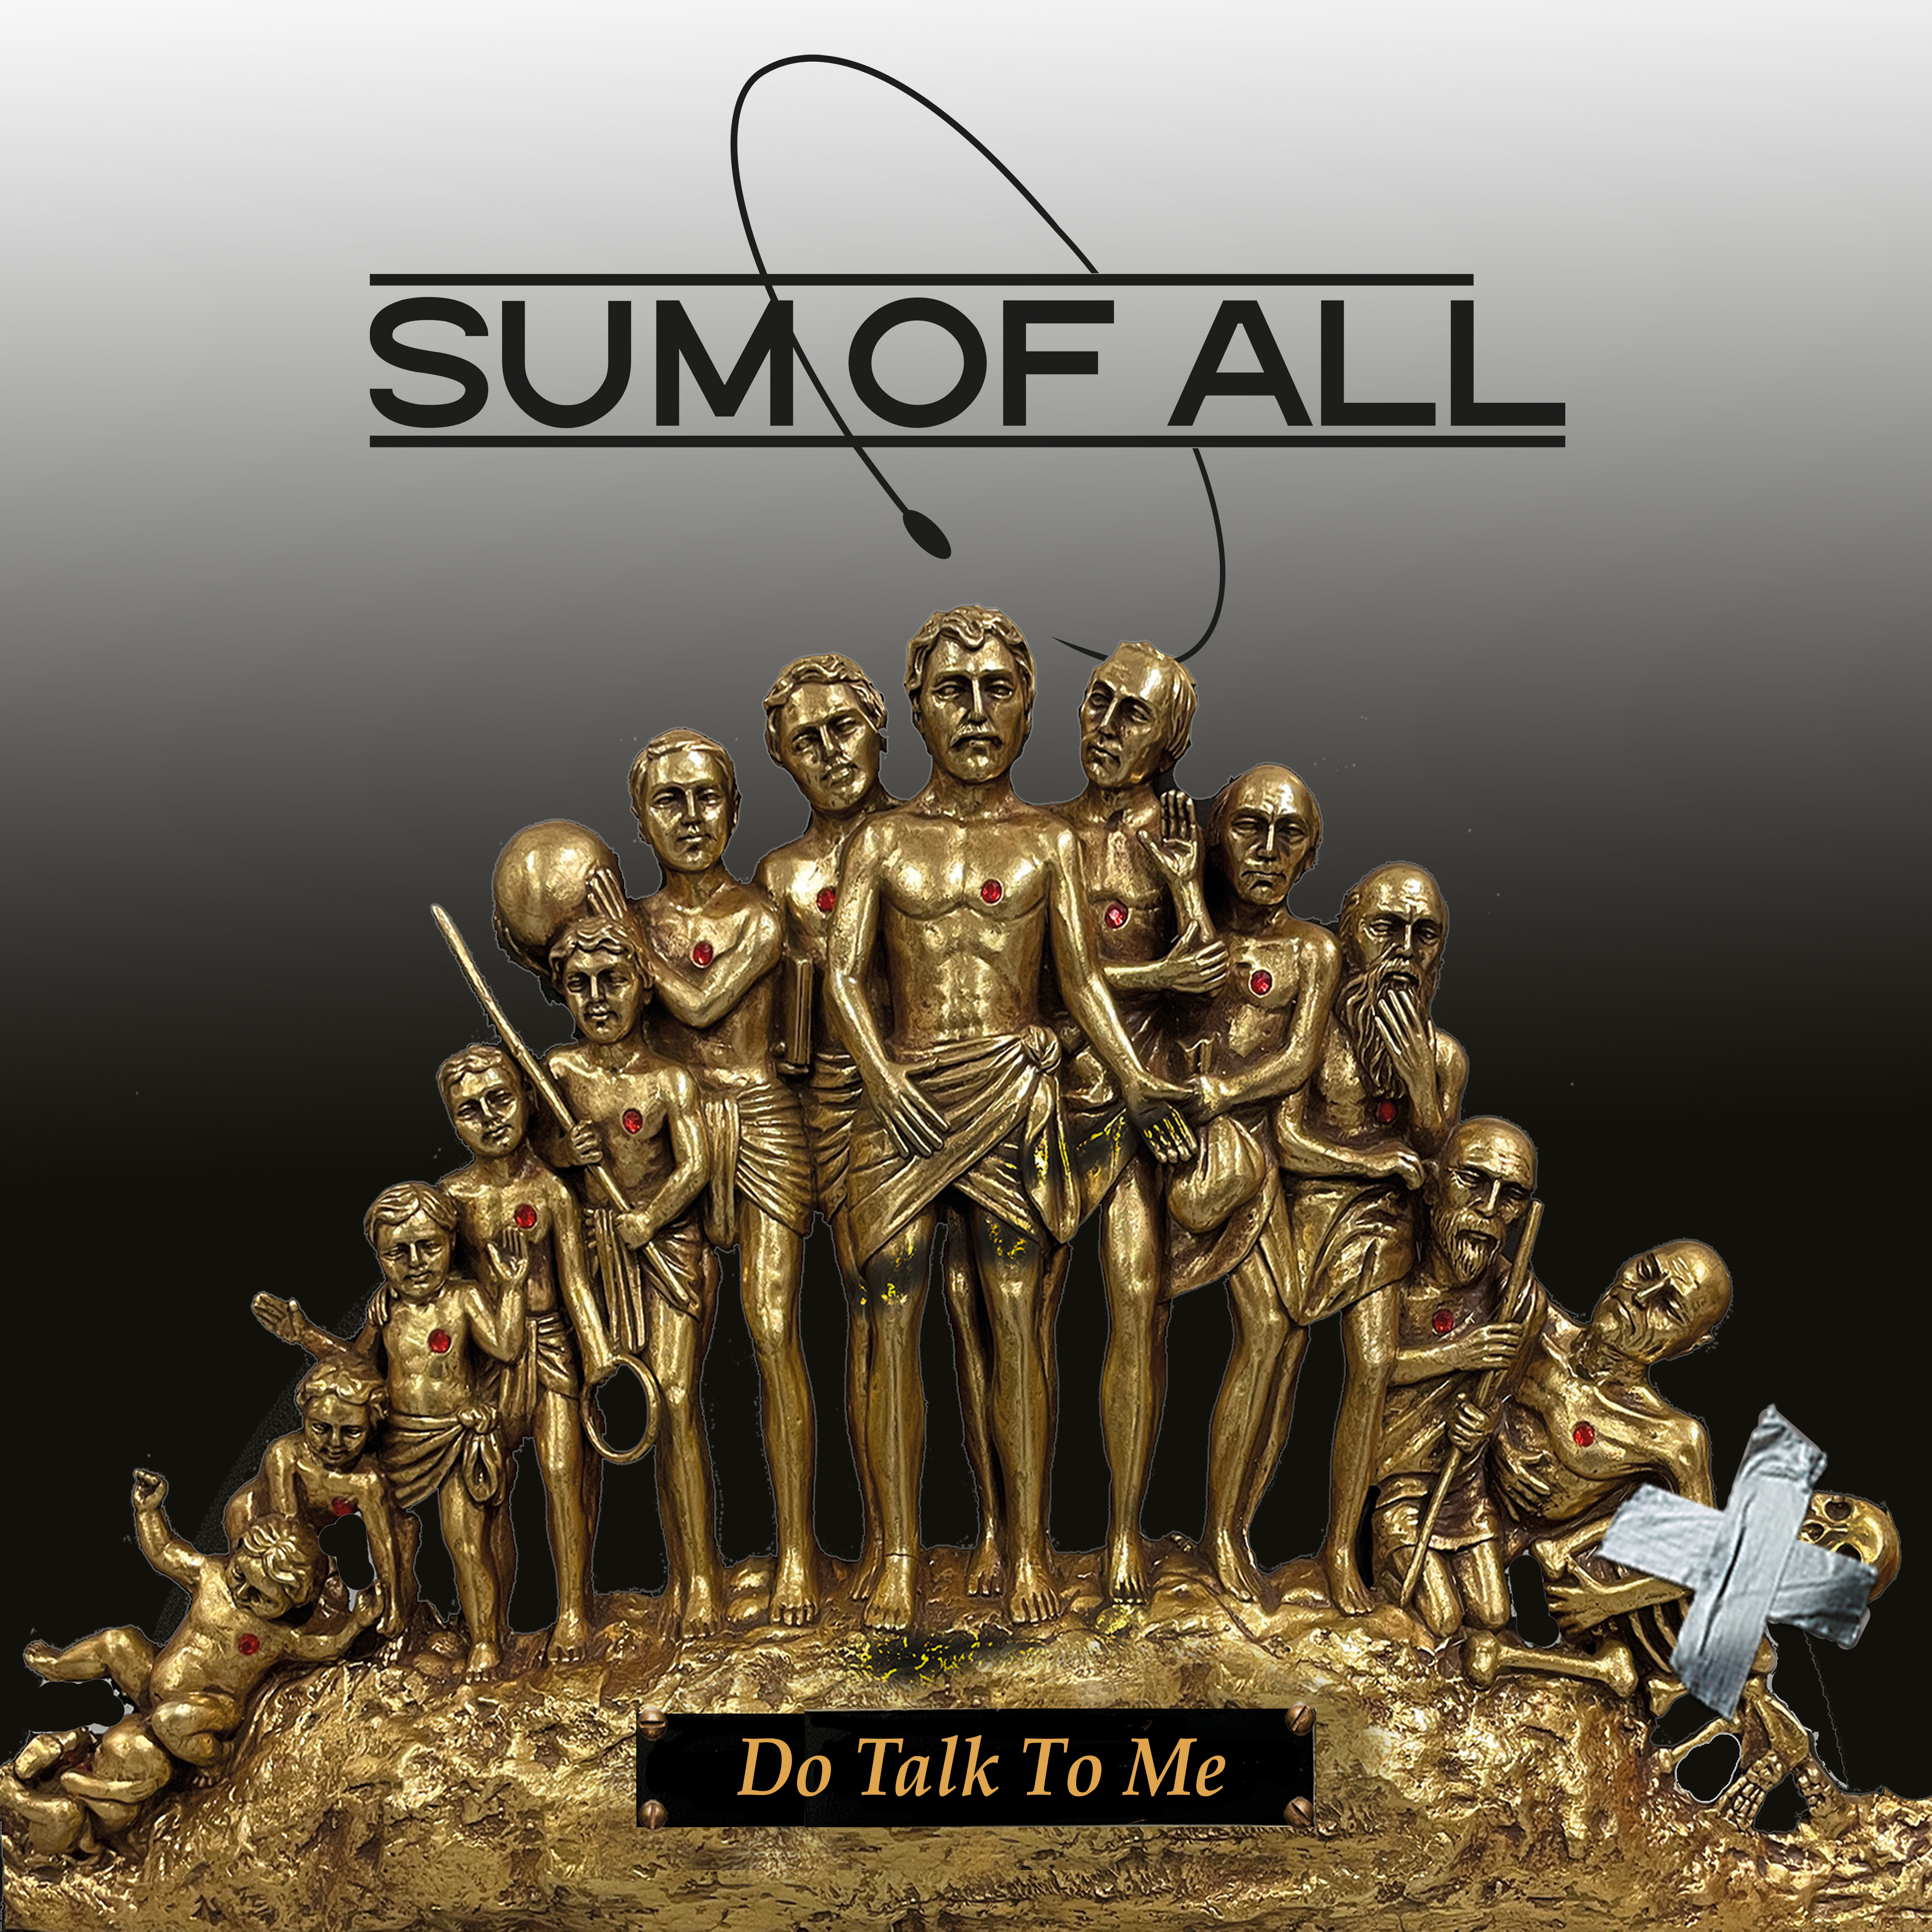 Album cover to song: Do Talk To Me, Sum Of All.